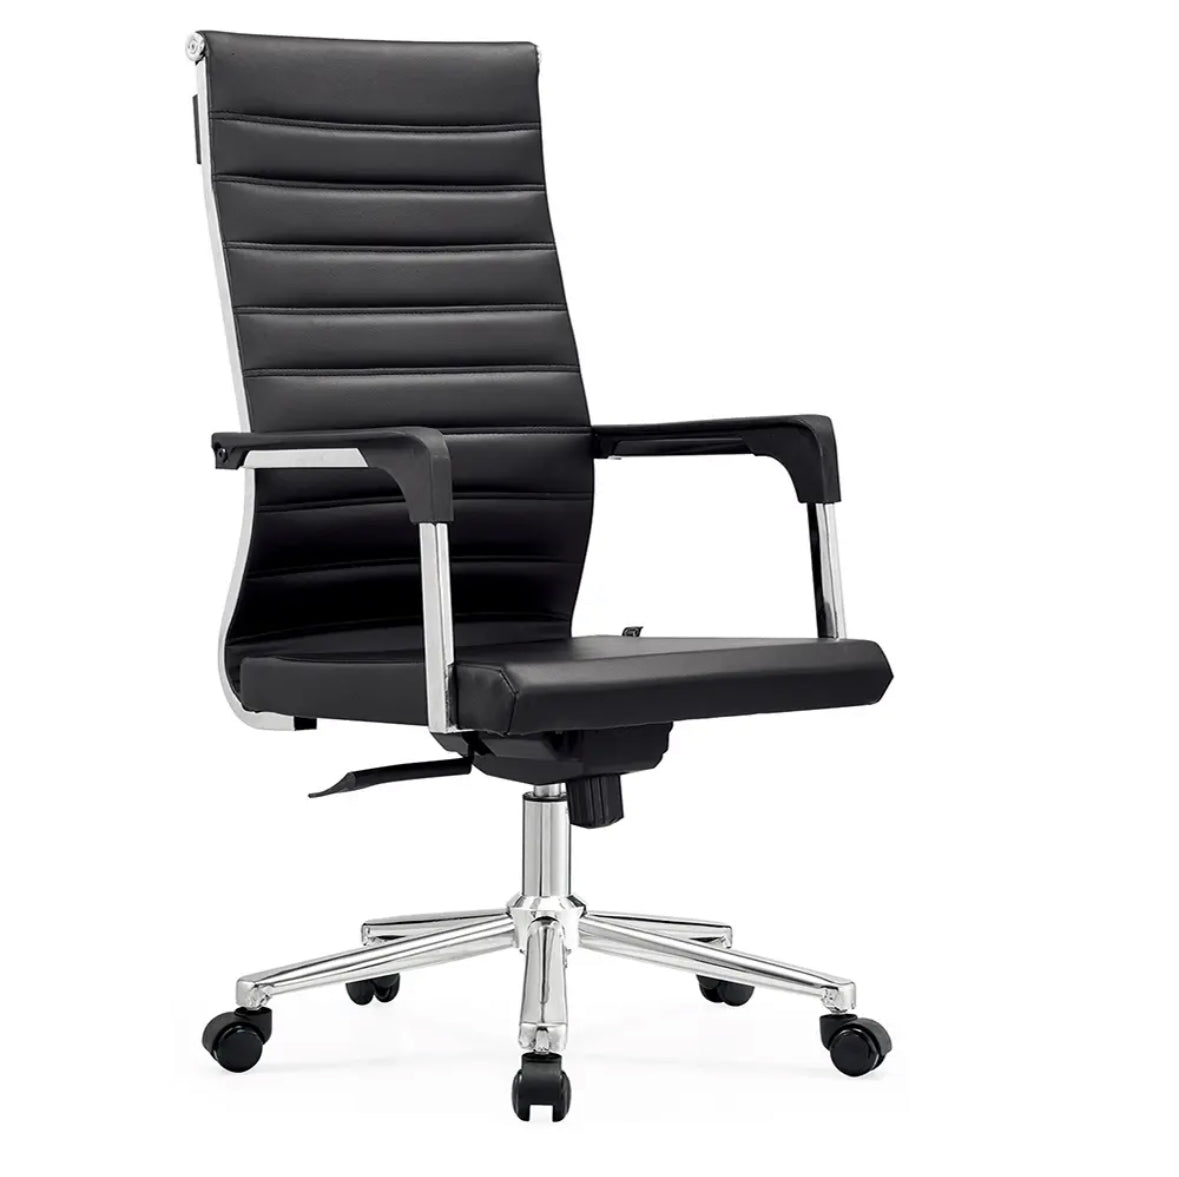 Seldo Manager Chair